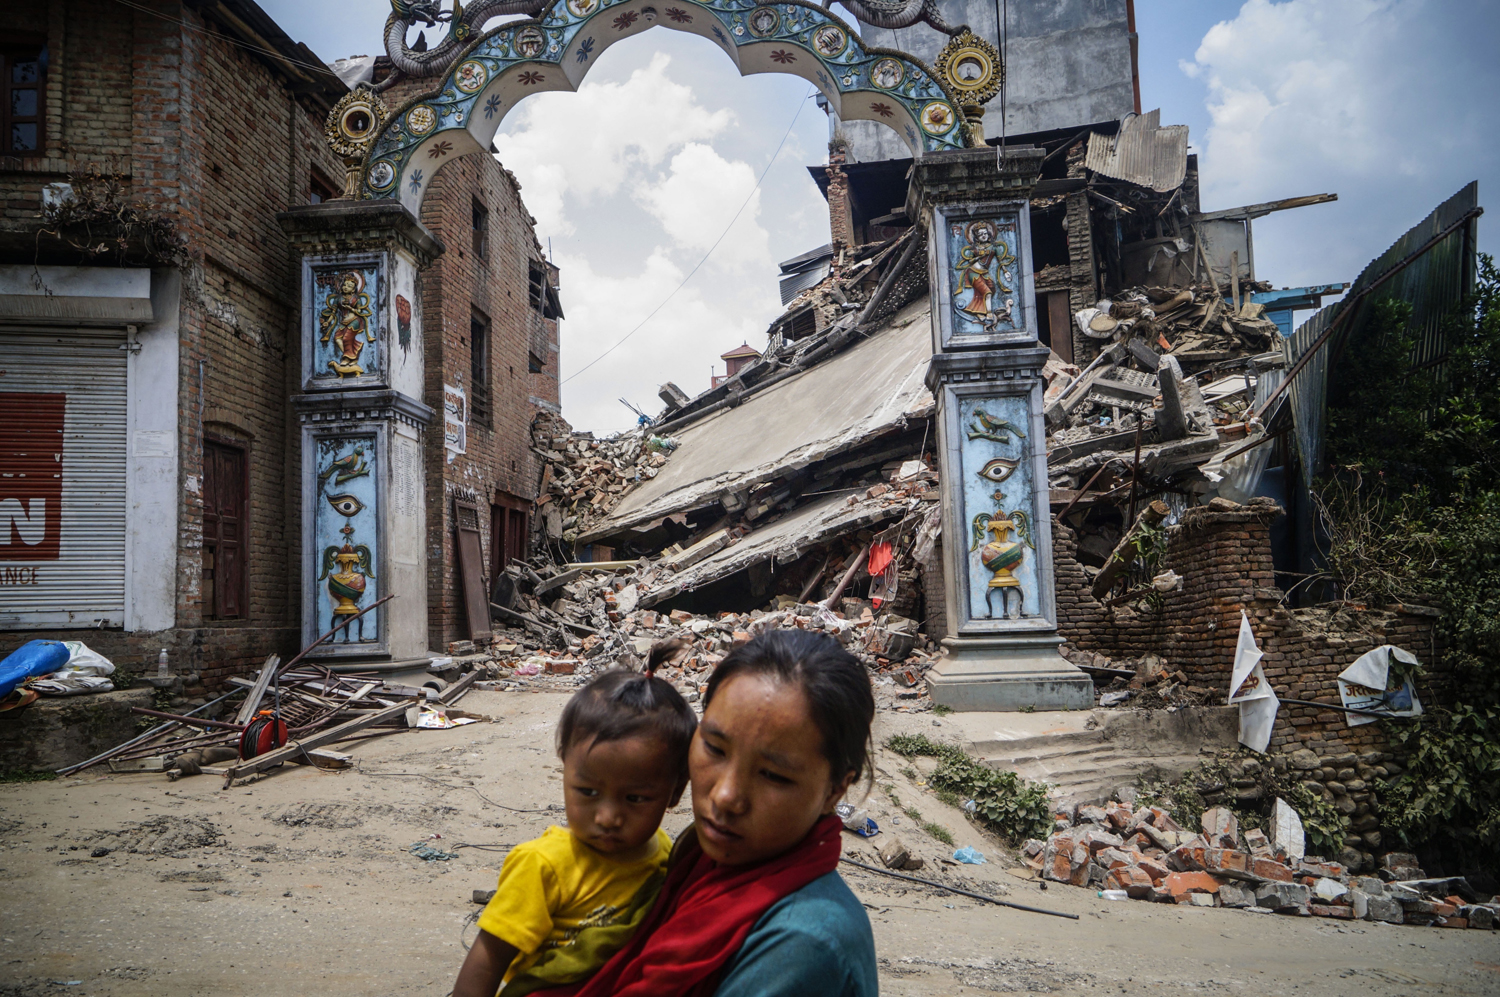 Aftermath of Earthquake in Nepal